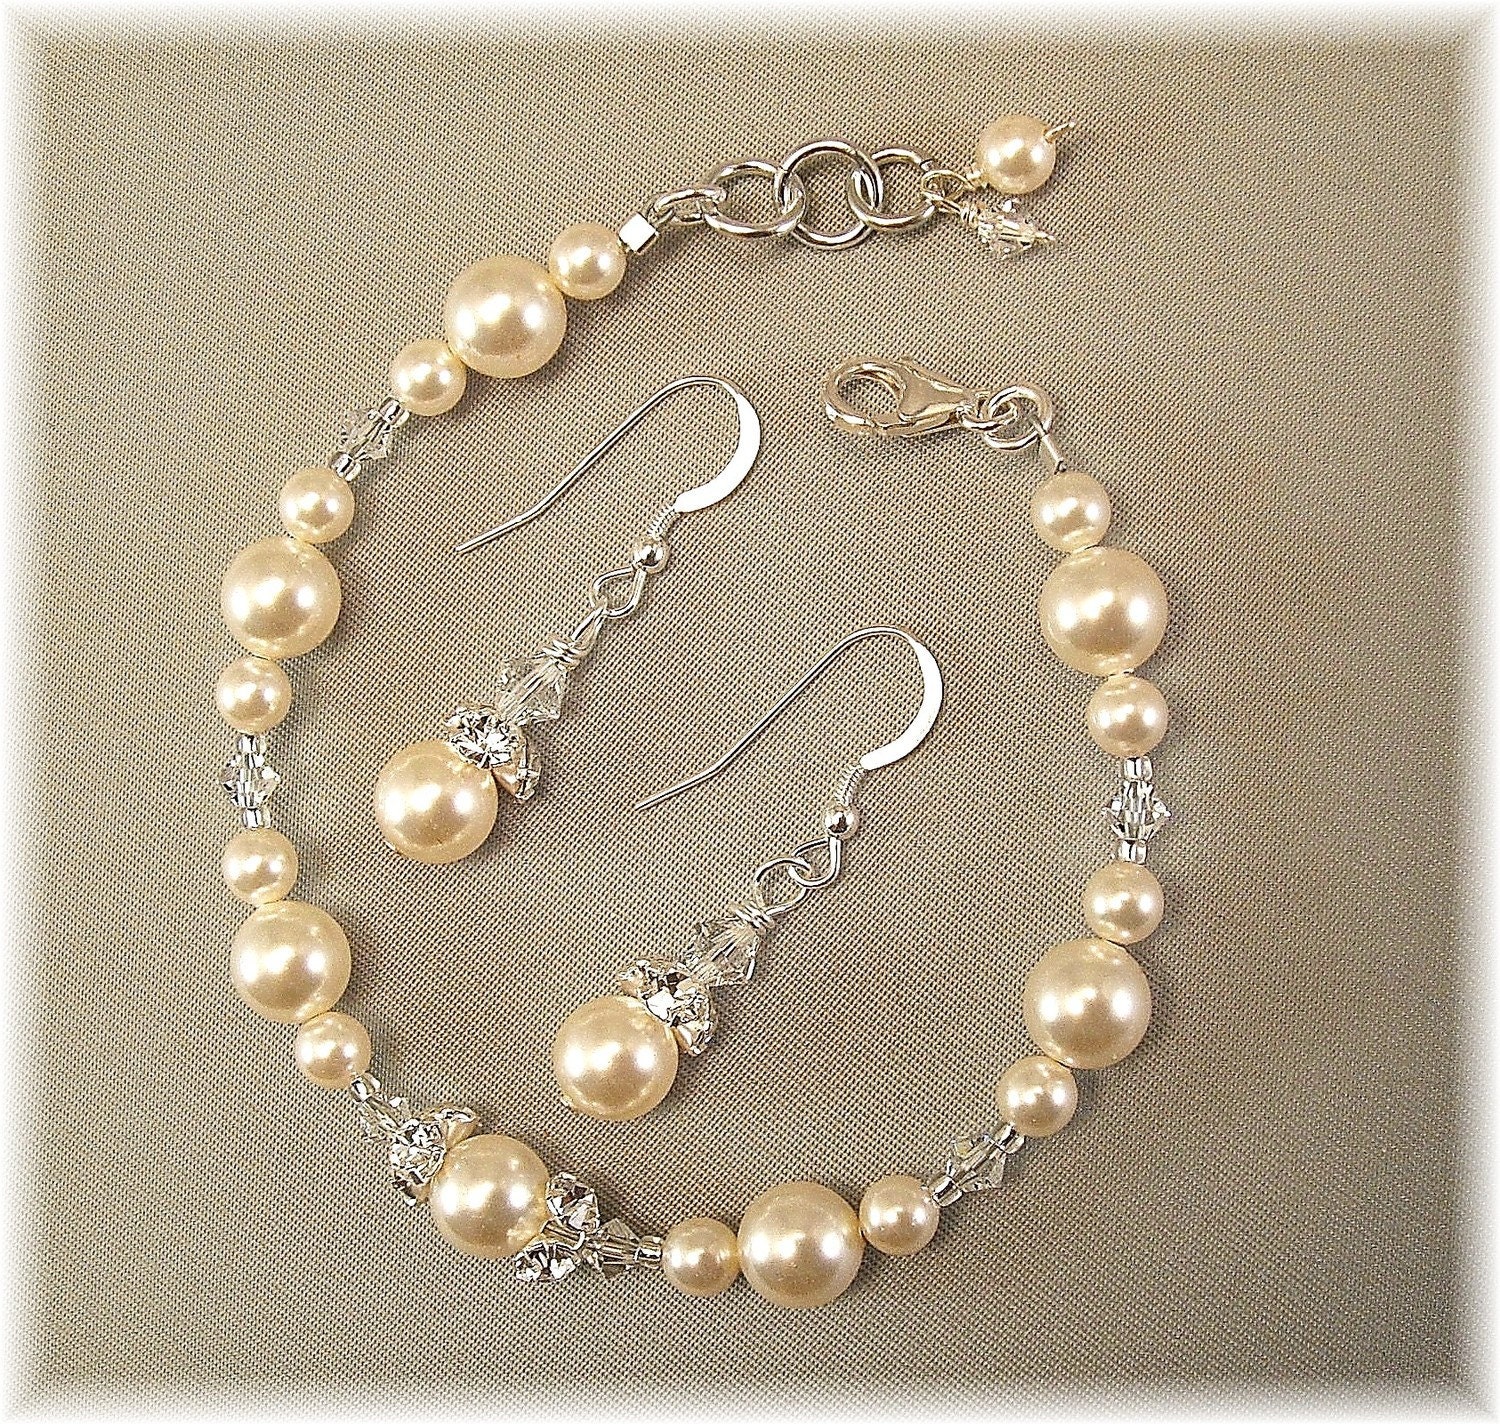 Ivory Pearl and Crystal Bracelet and Earring Sets by Handwired ivory 